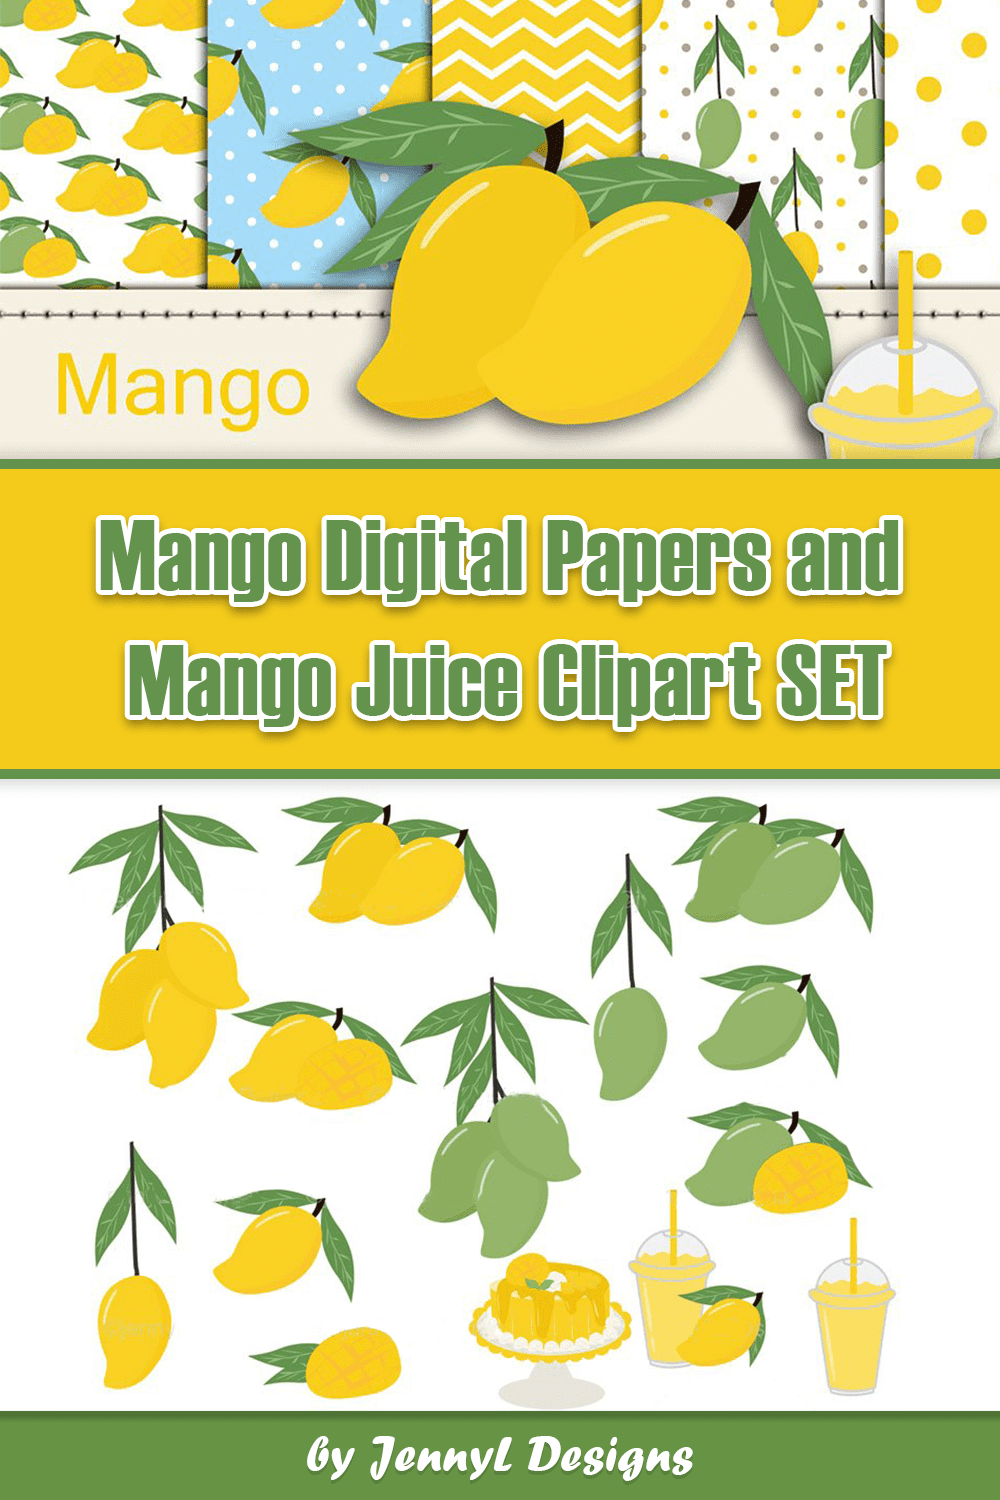 Mango Digital Papers and Mango Juice Clipart SET - pinterest image preview.